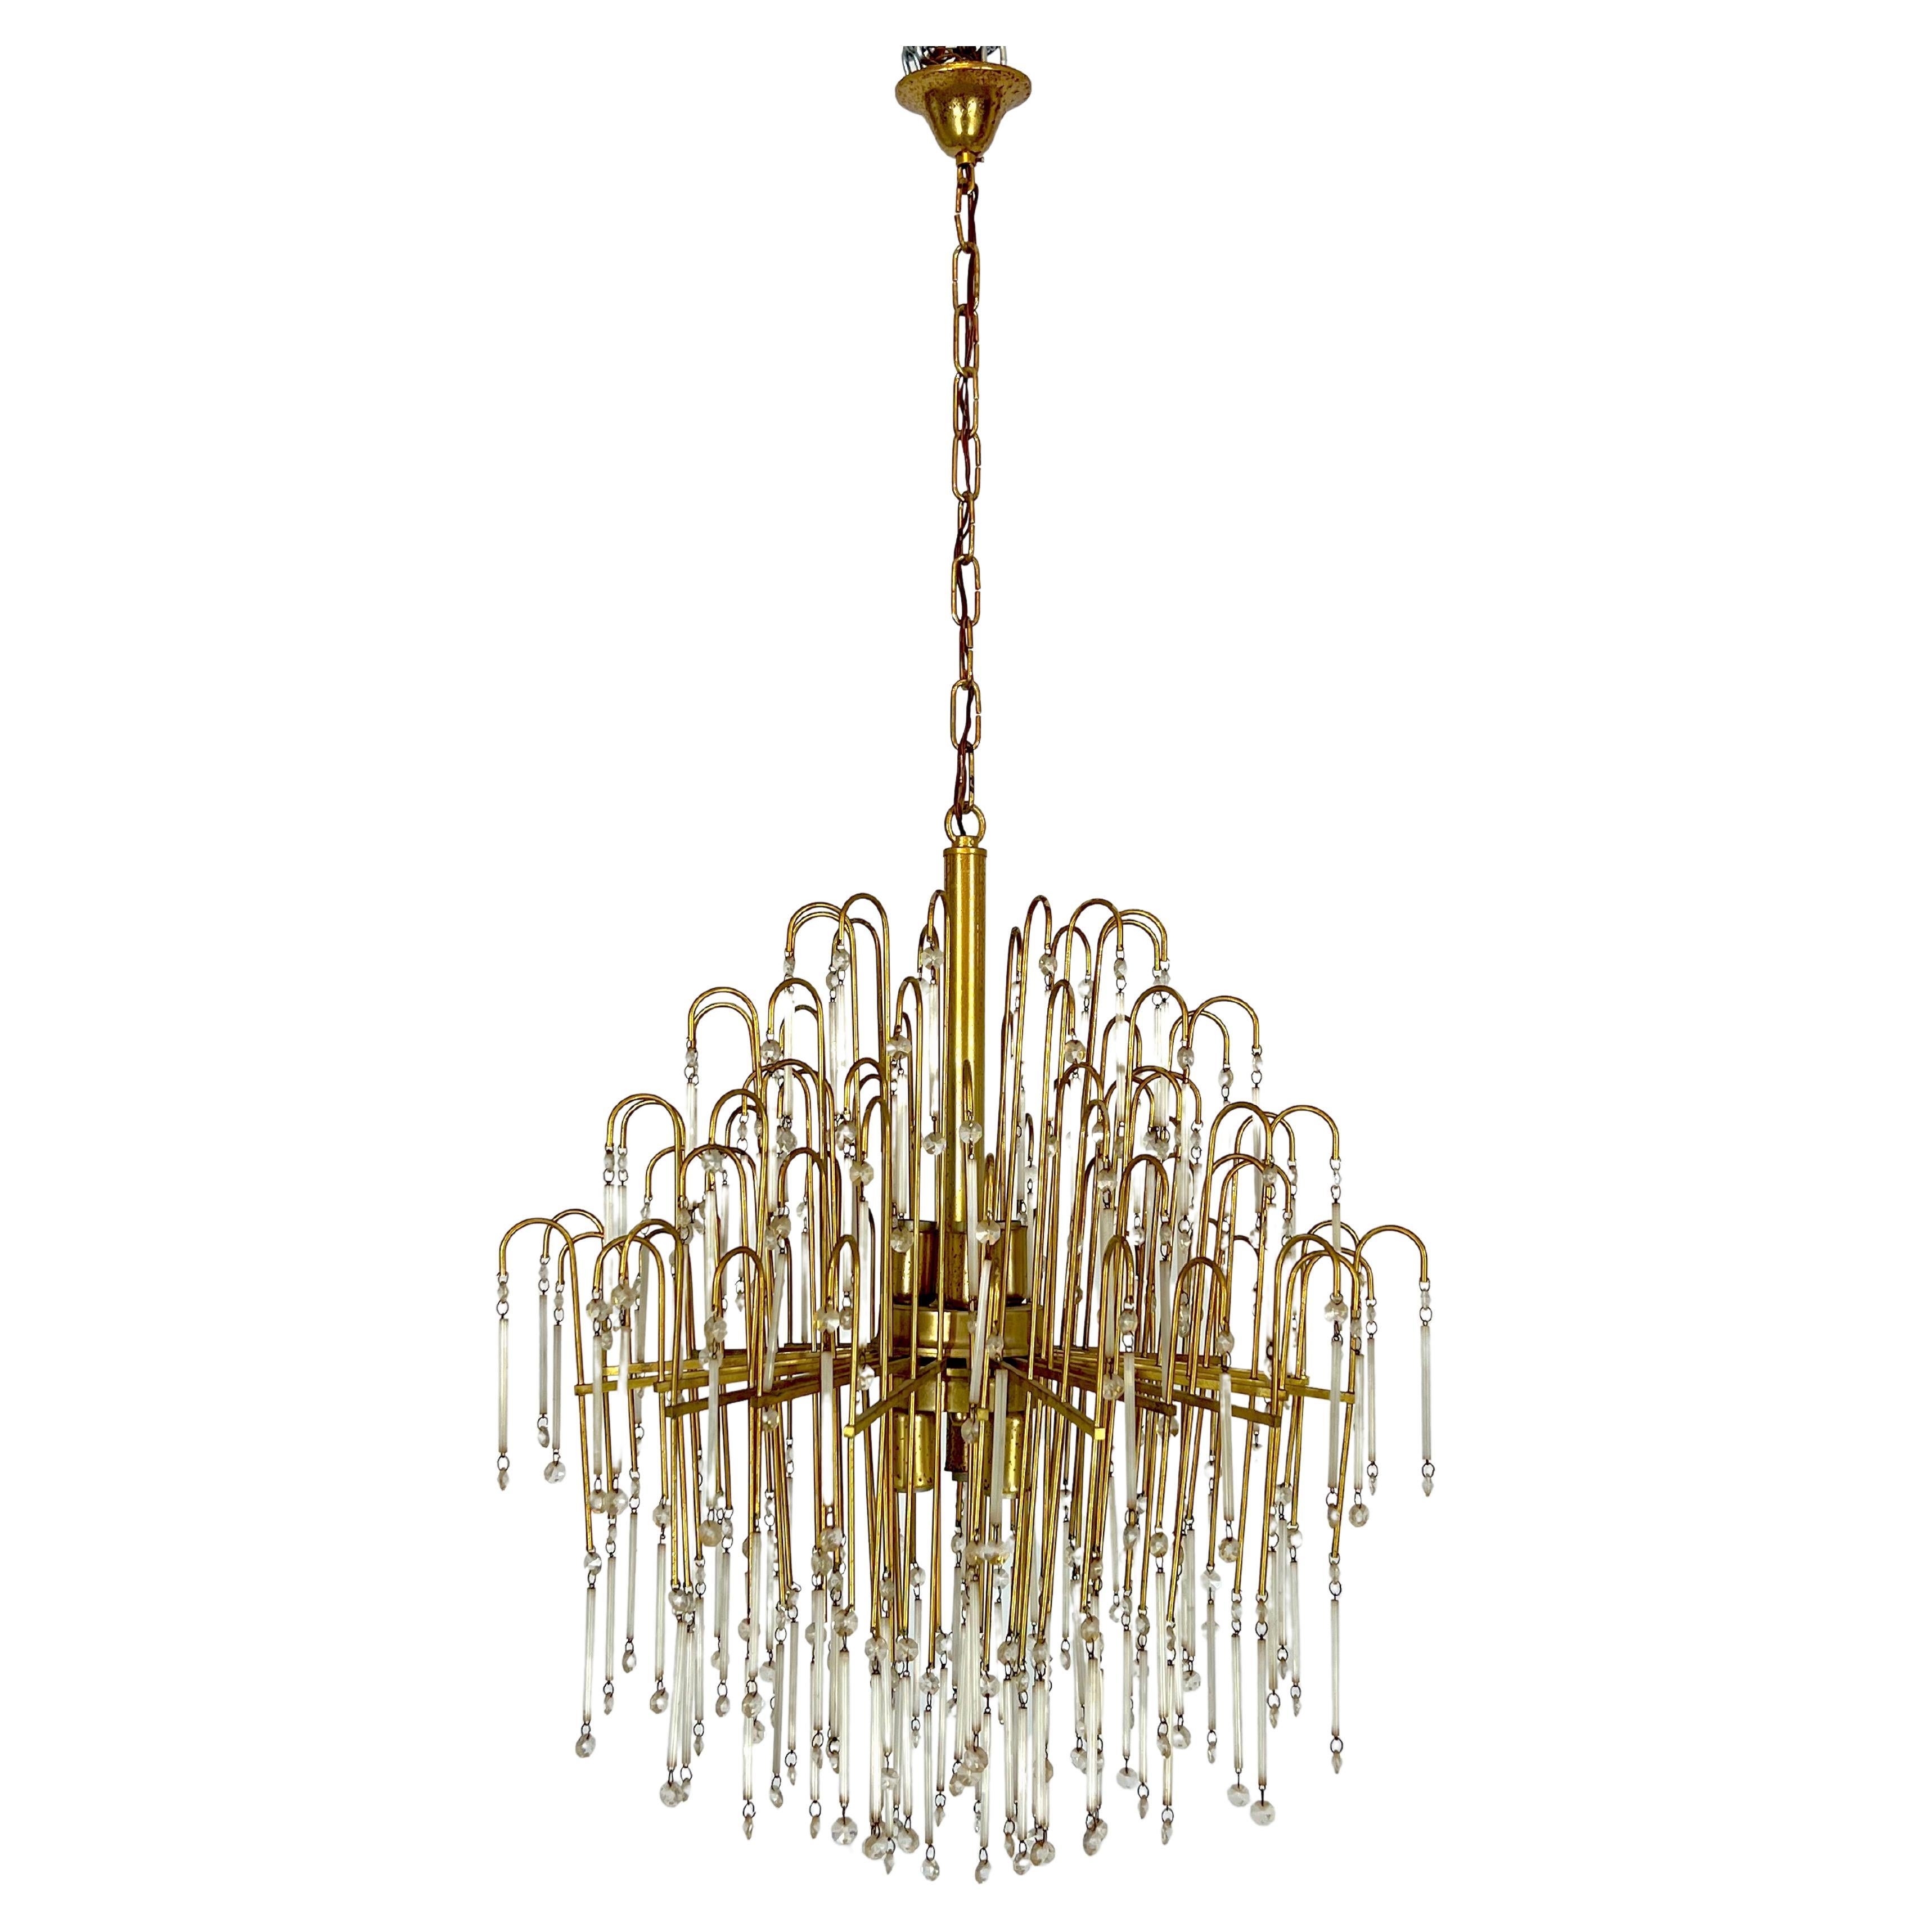 Mid-century, Italian brass and glass chandelier from 70s